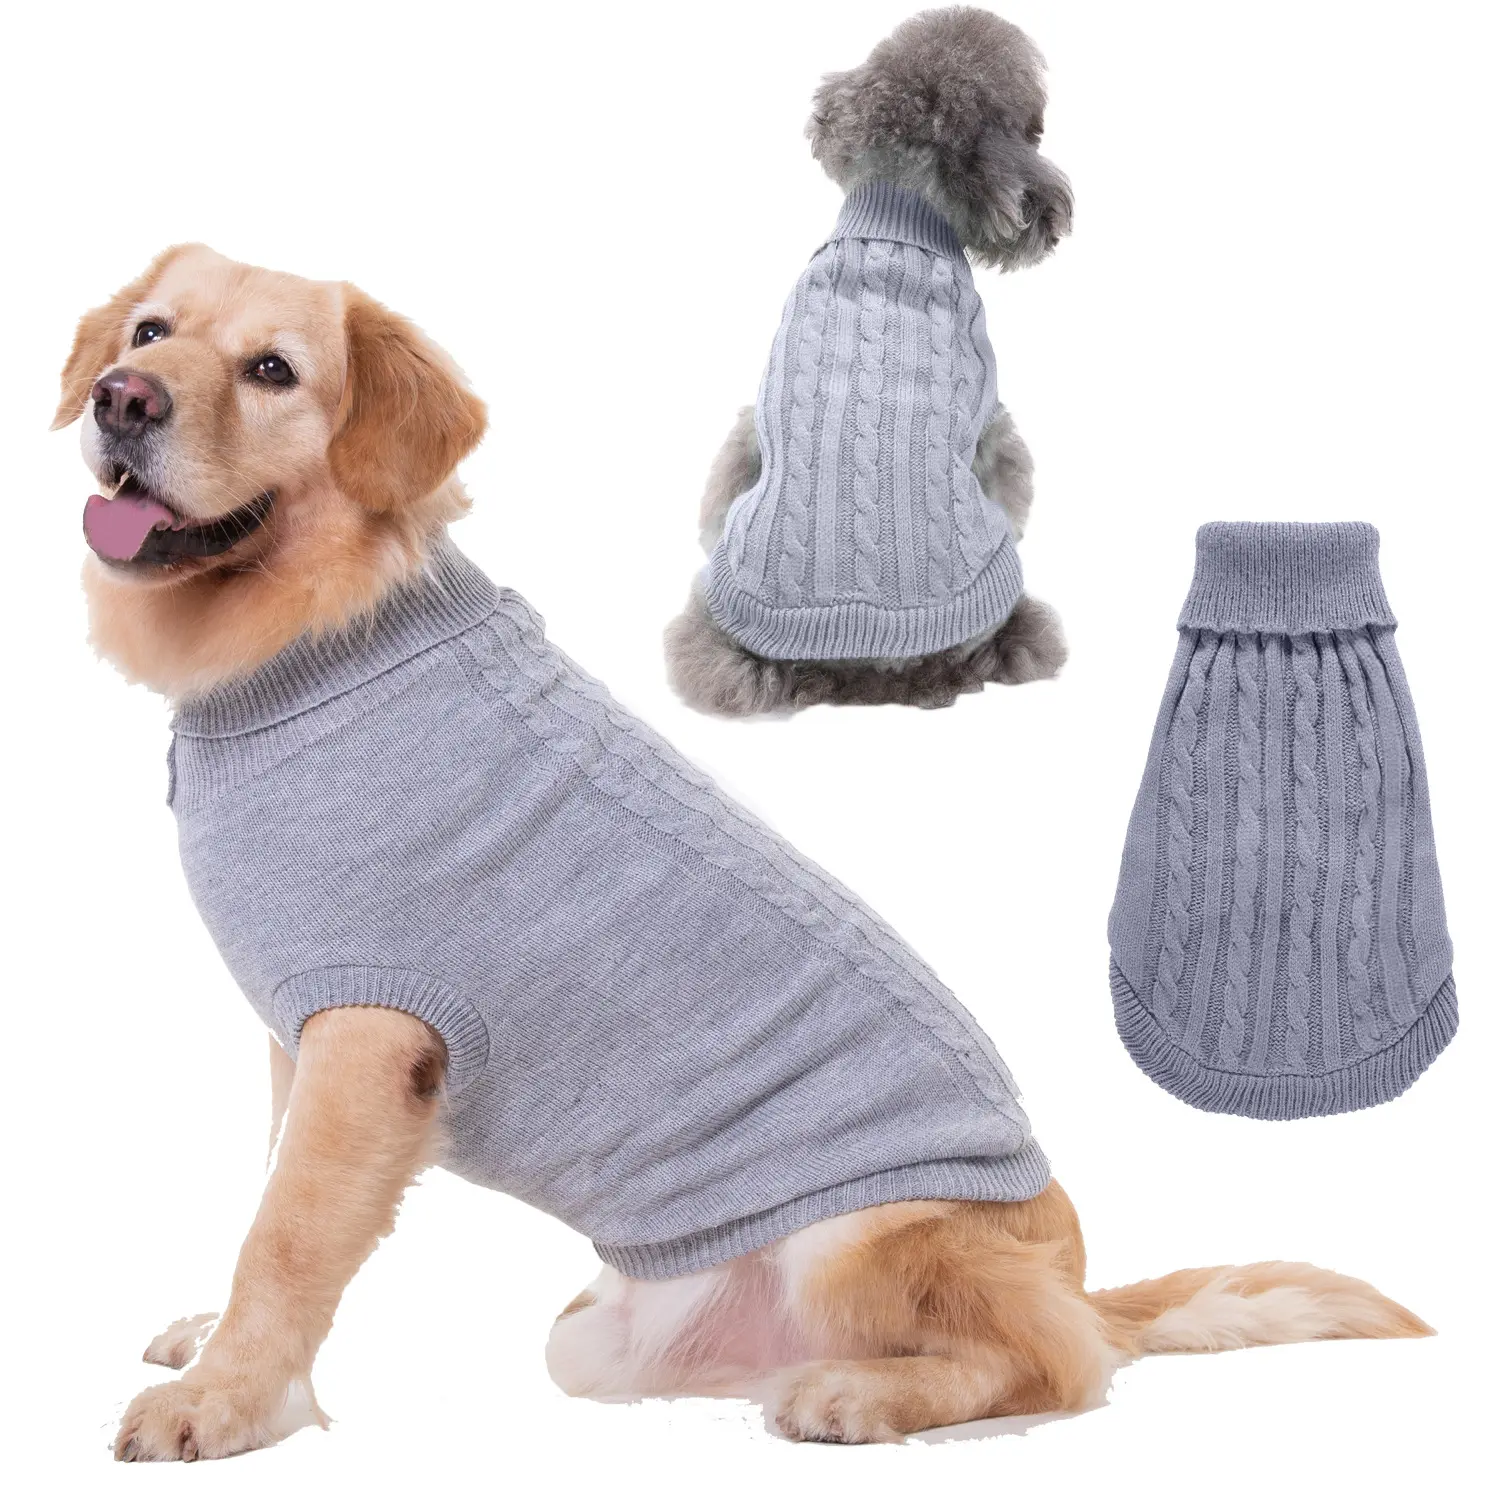 Pet Dog Clothing Fall Winter Dog Clothes Solid Color Dog Sweater Wholesale Custom Soft Multi Color Cute Warm Sustainable 10pcs